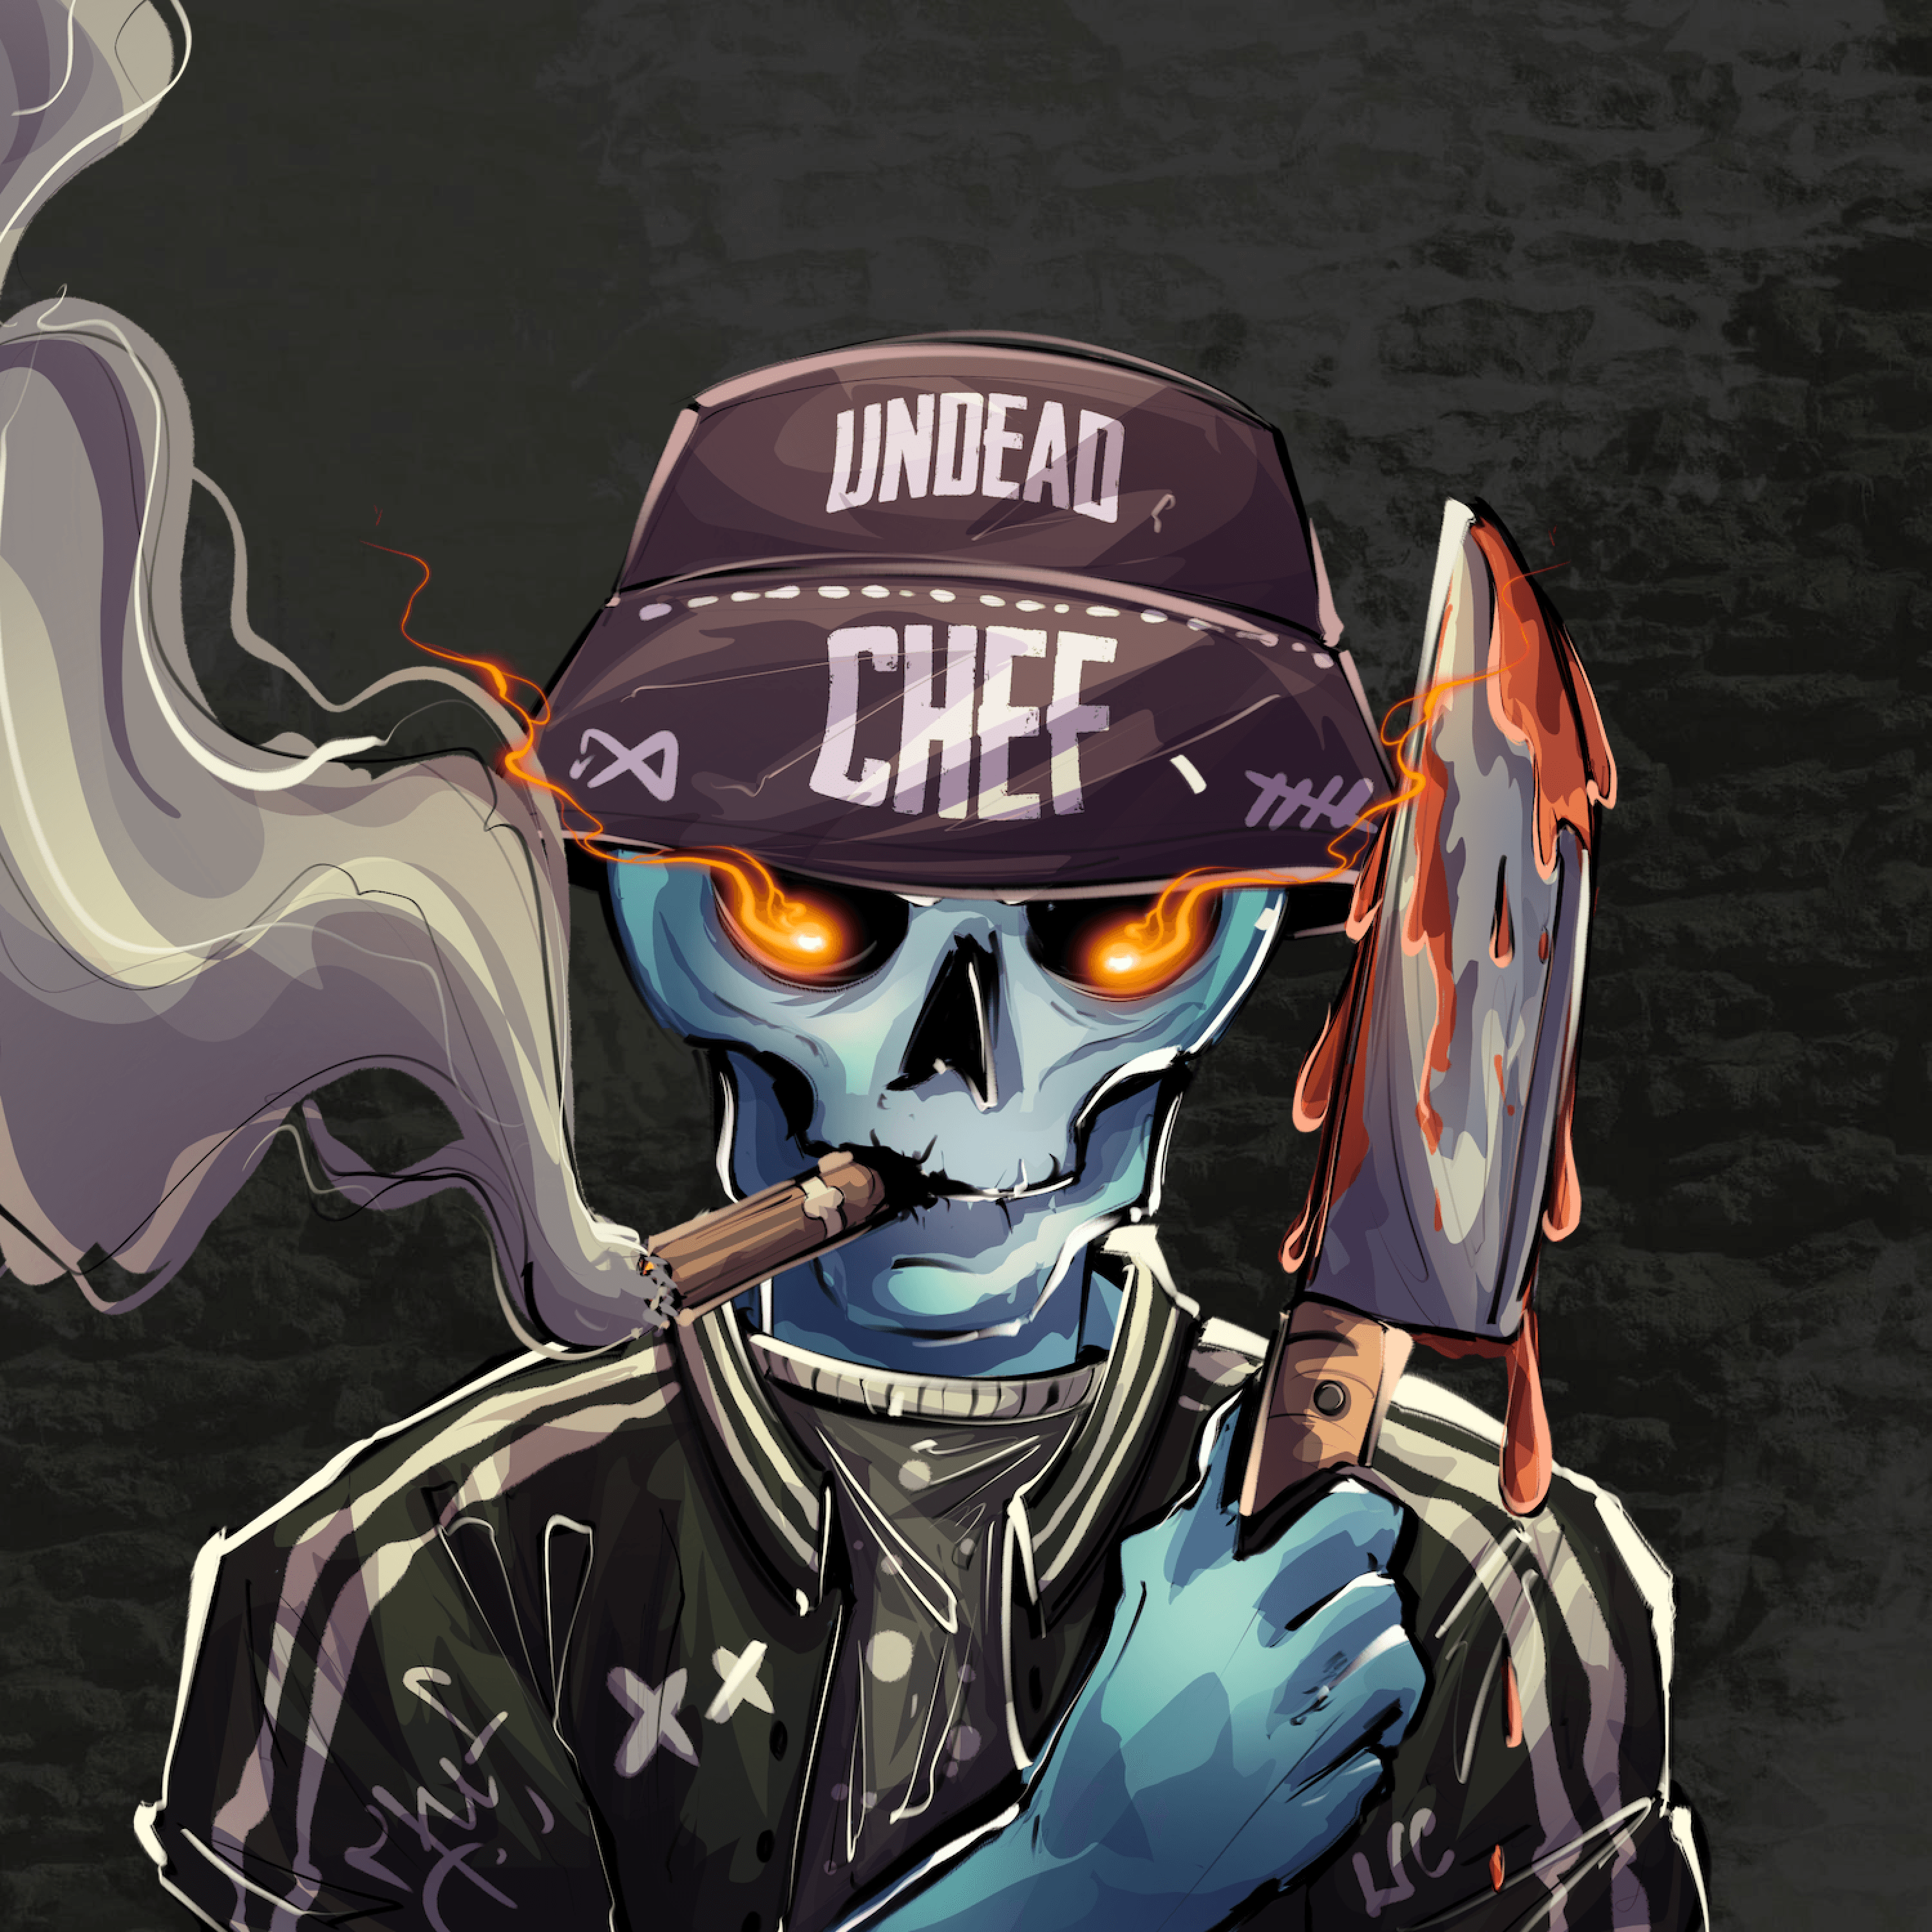 Undead Chefs #483